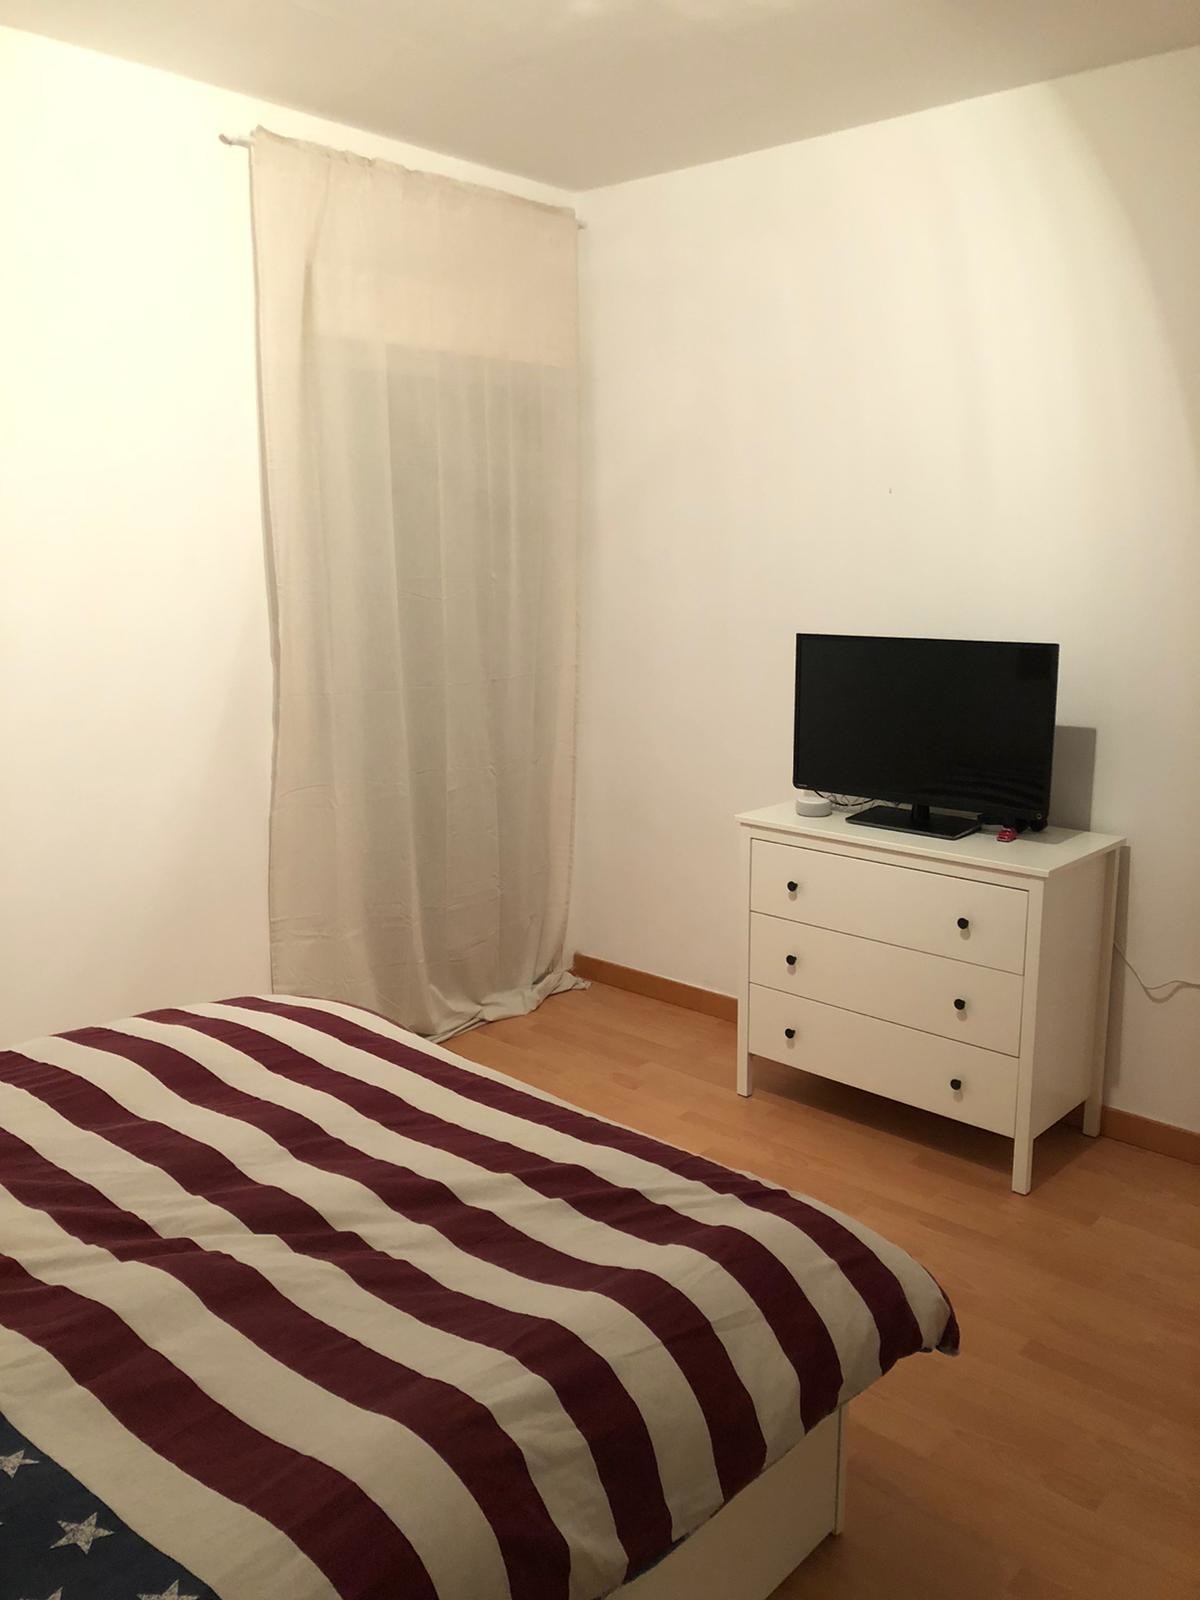 Double bed room, with natural light, big room with